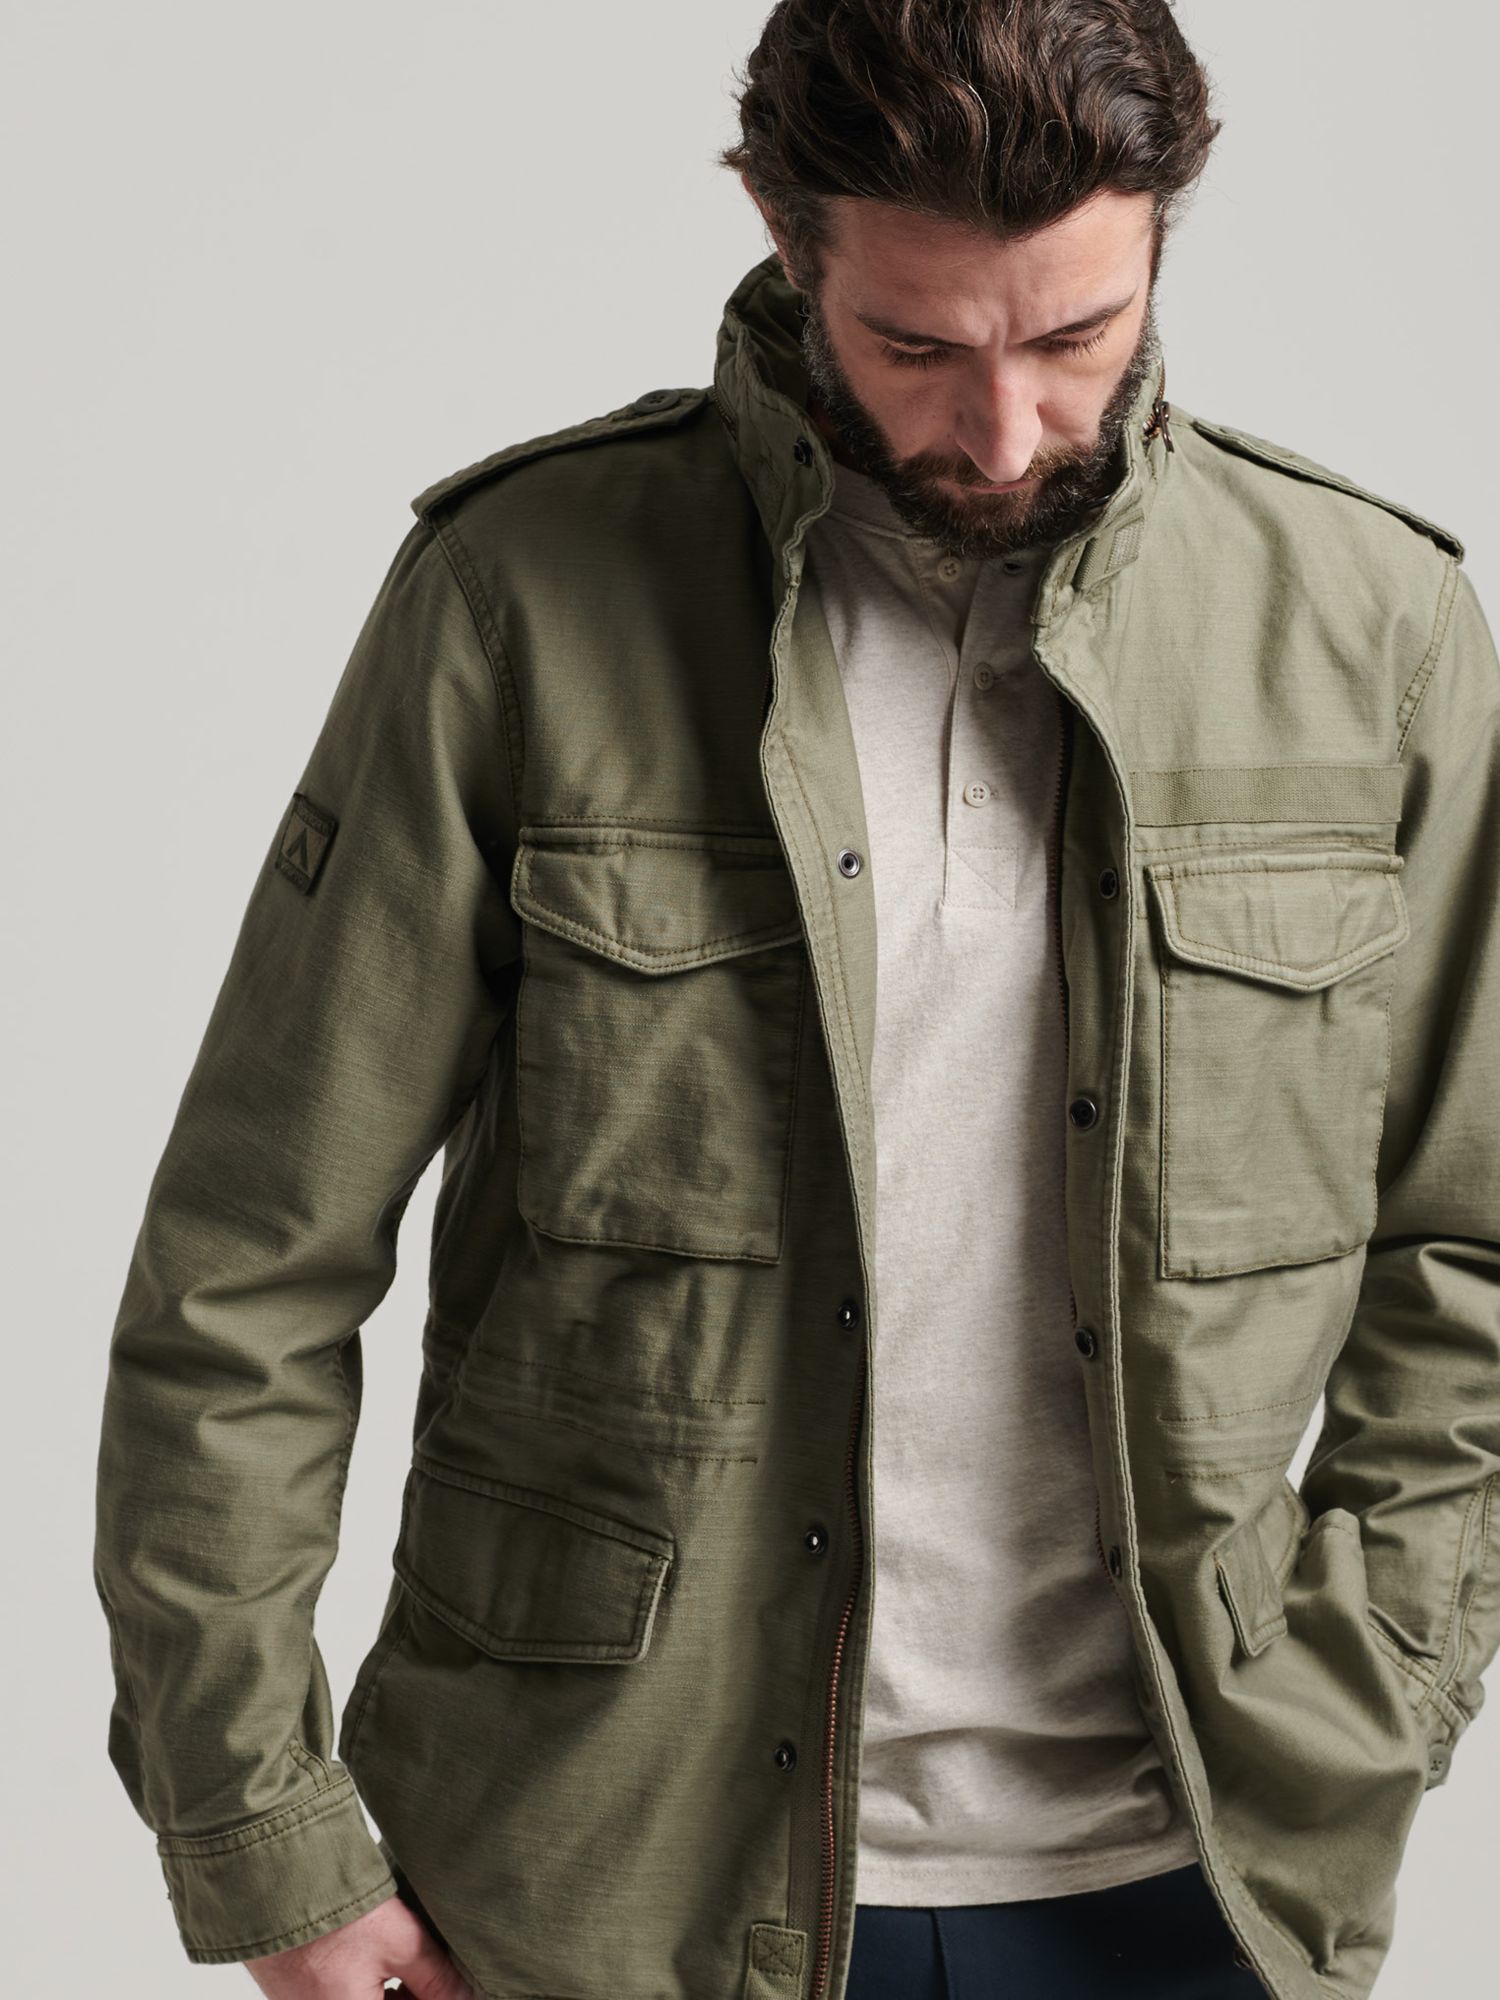 Superdry Military M65 Jacket, Dusty Olive Green